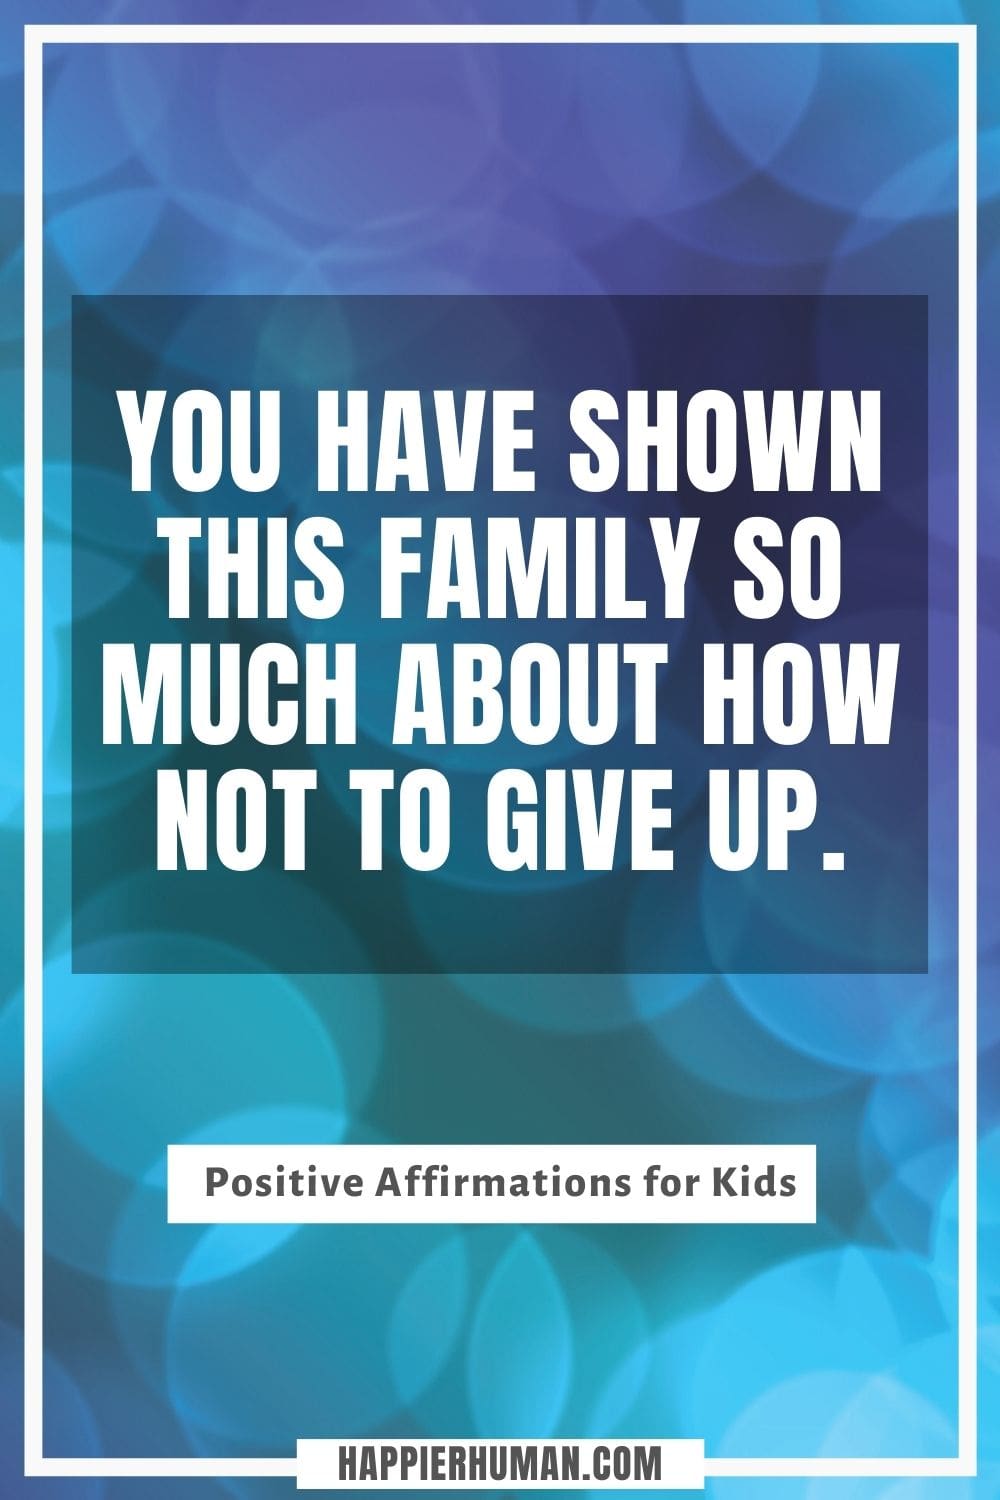 Positive Affirmations for Kids - You have shown this family so much about how not to give up. | positive affirmations for kids | positive affirmations for students | list of positive affirmations for students